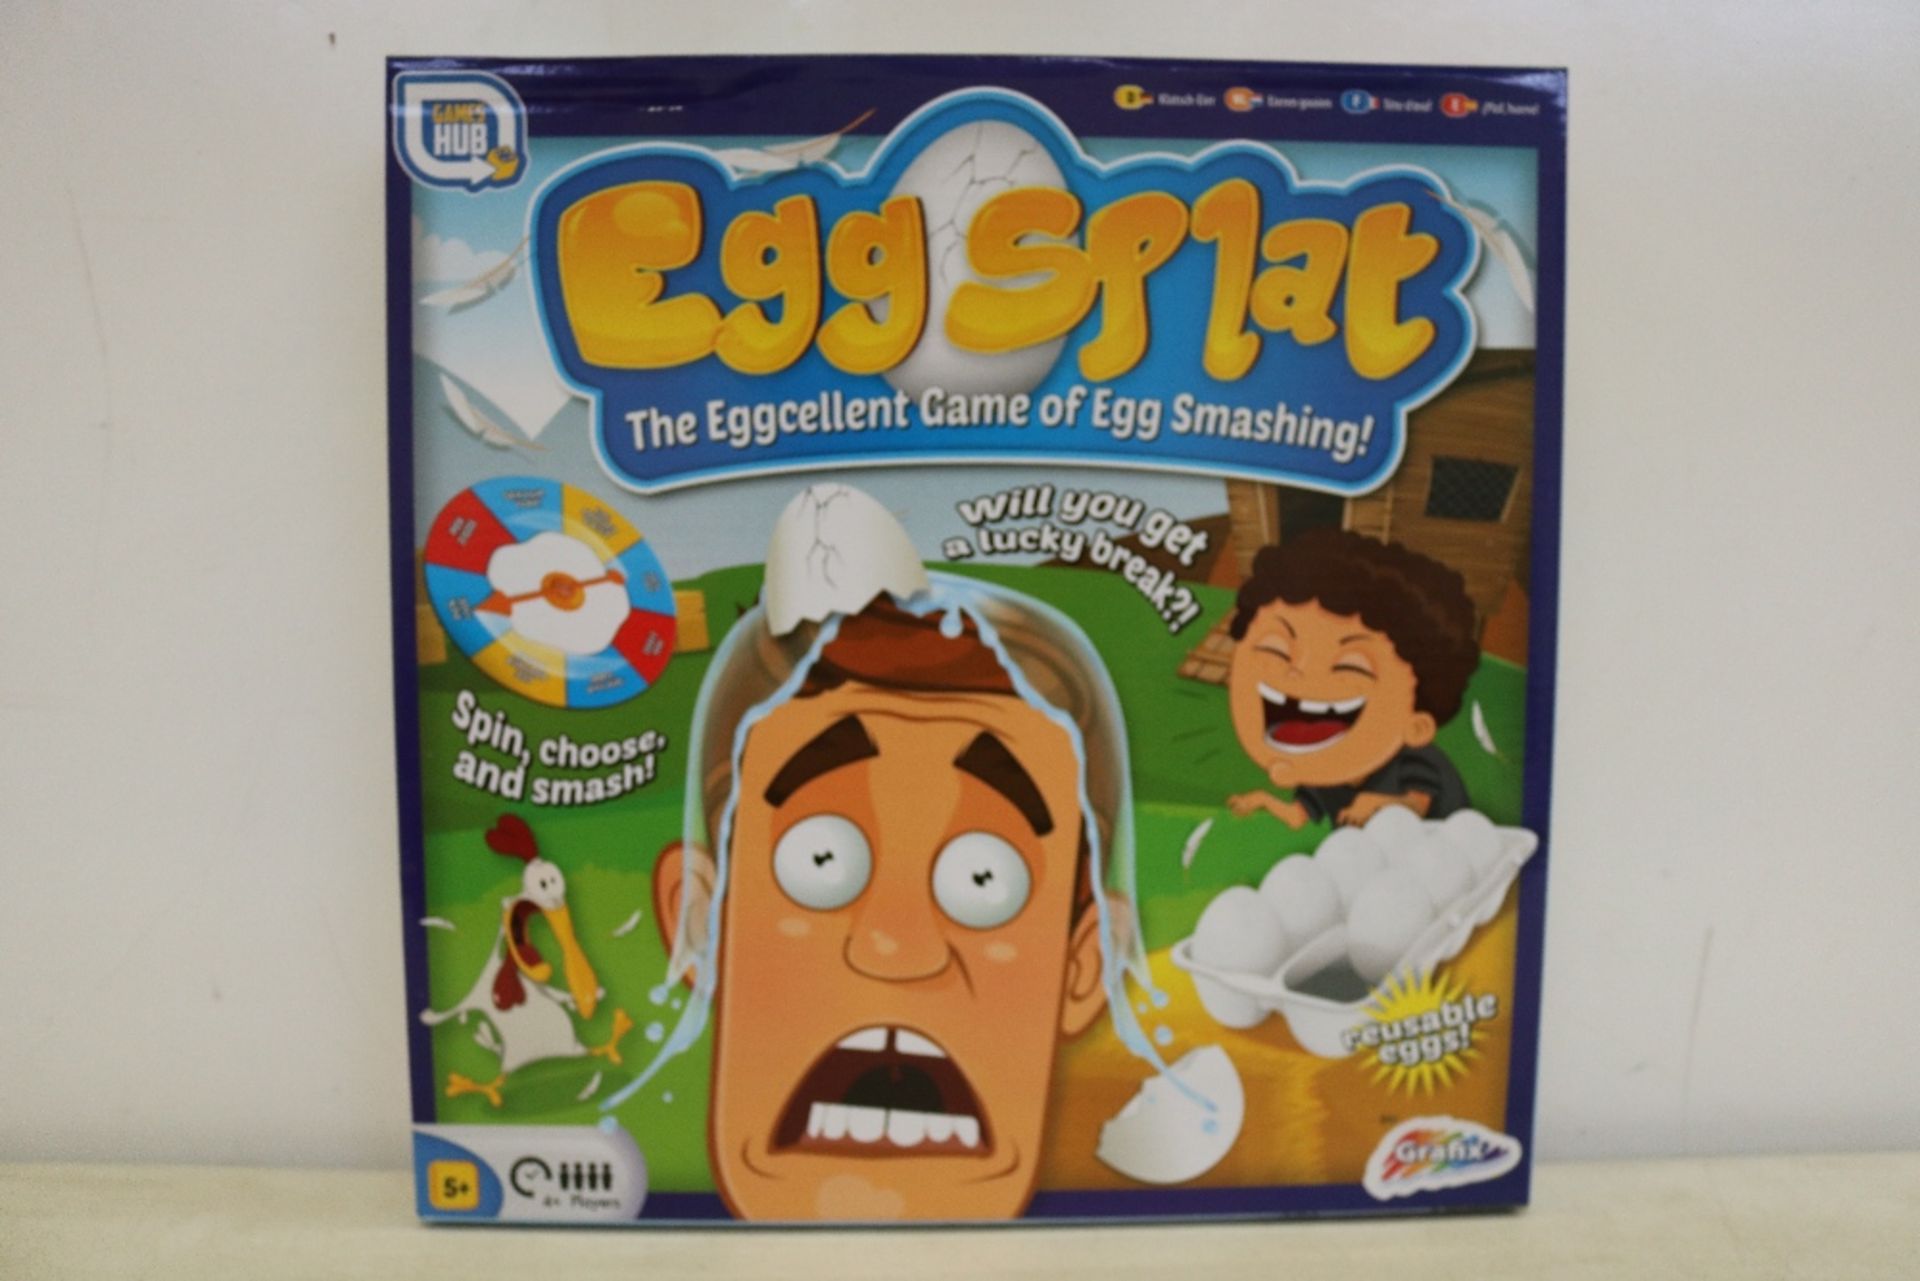 Games Hub Egg Splat game new and boxed.